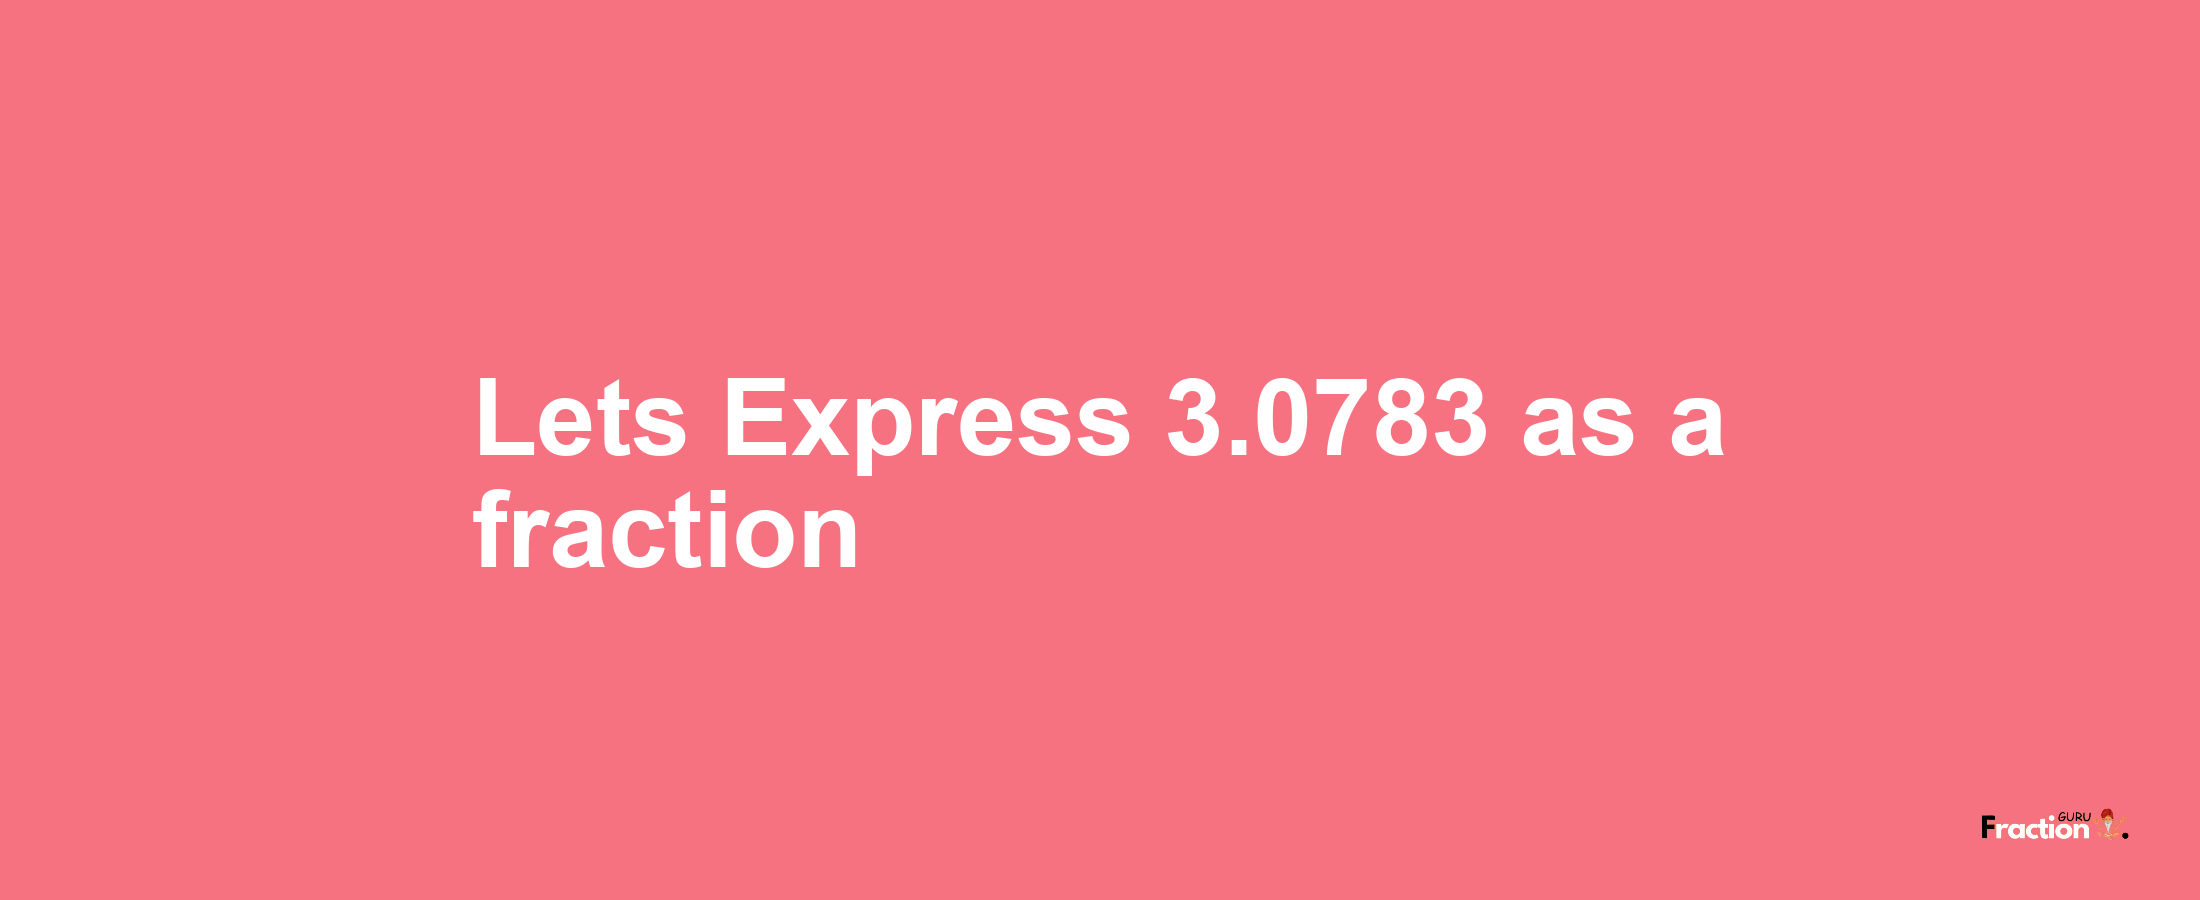 Lets Express 3.0783 as afraction